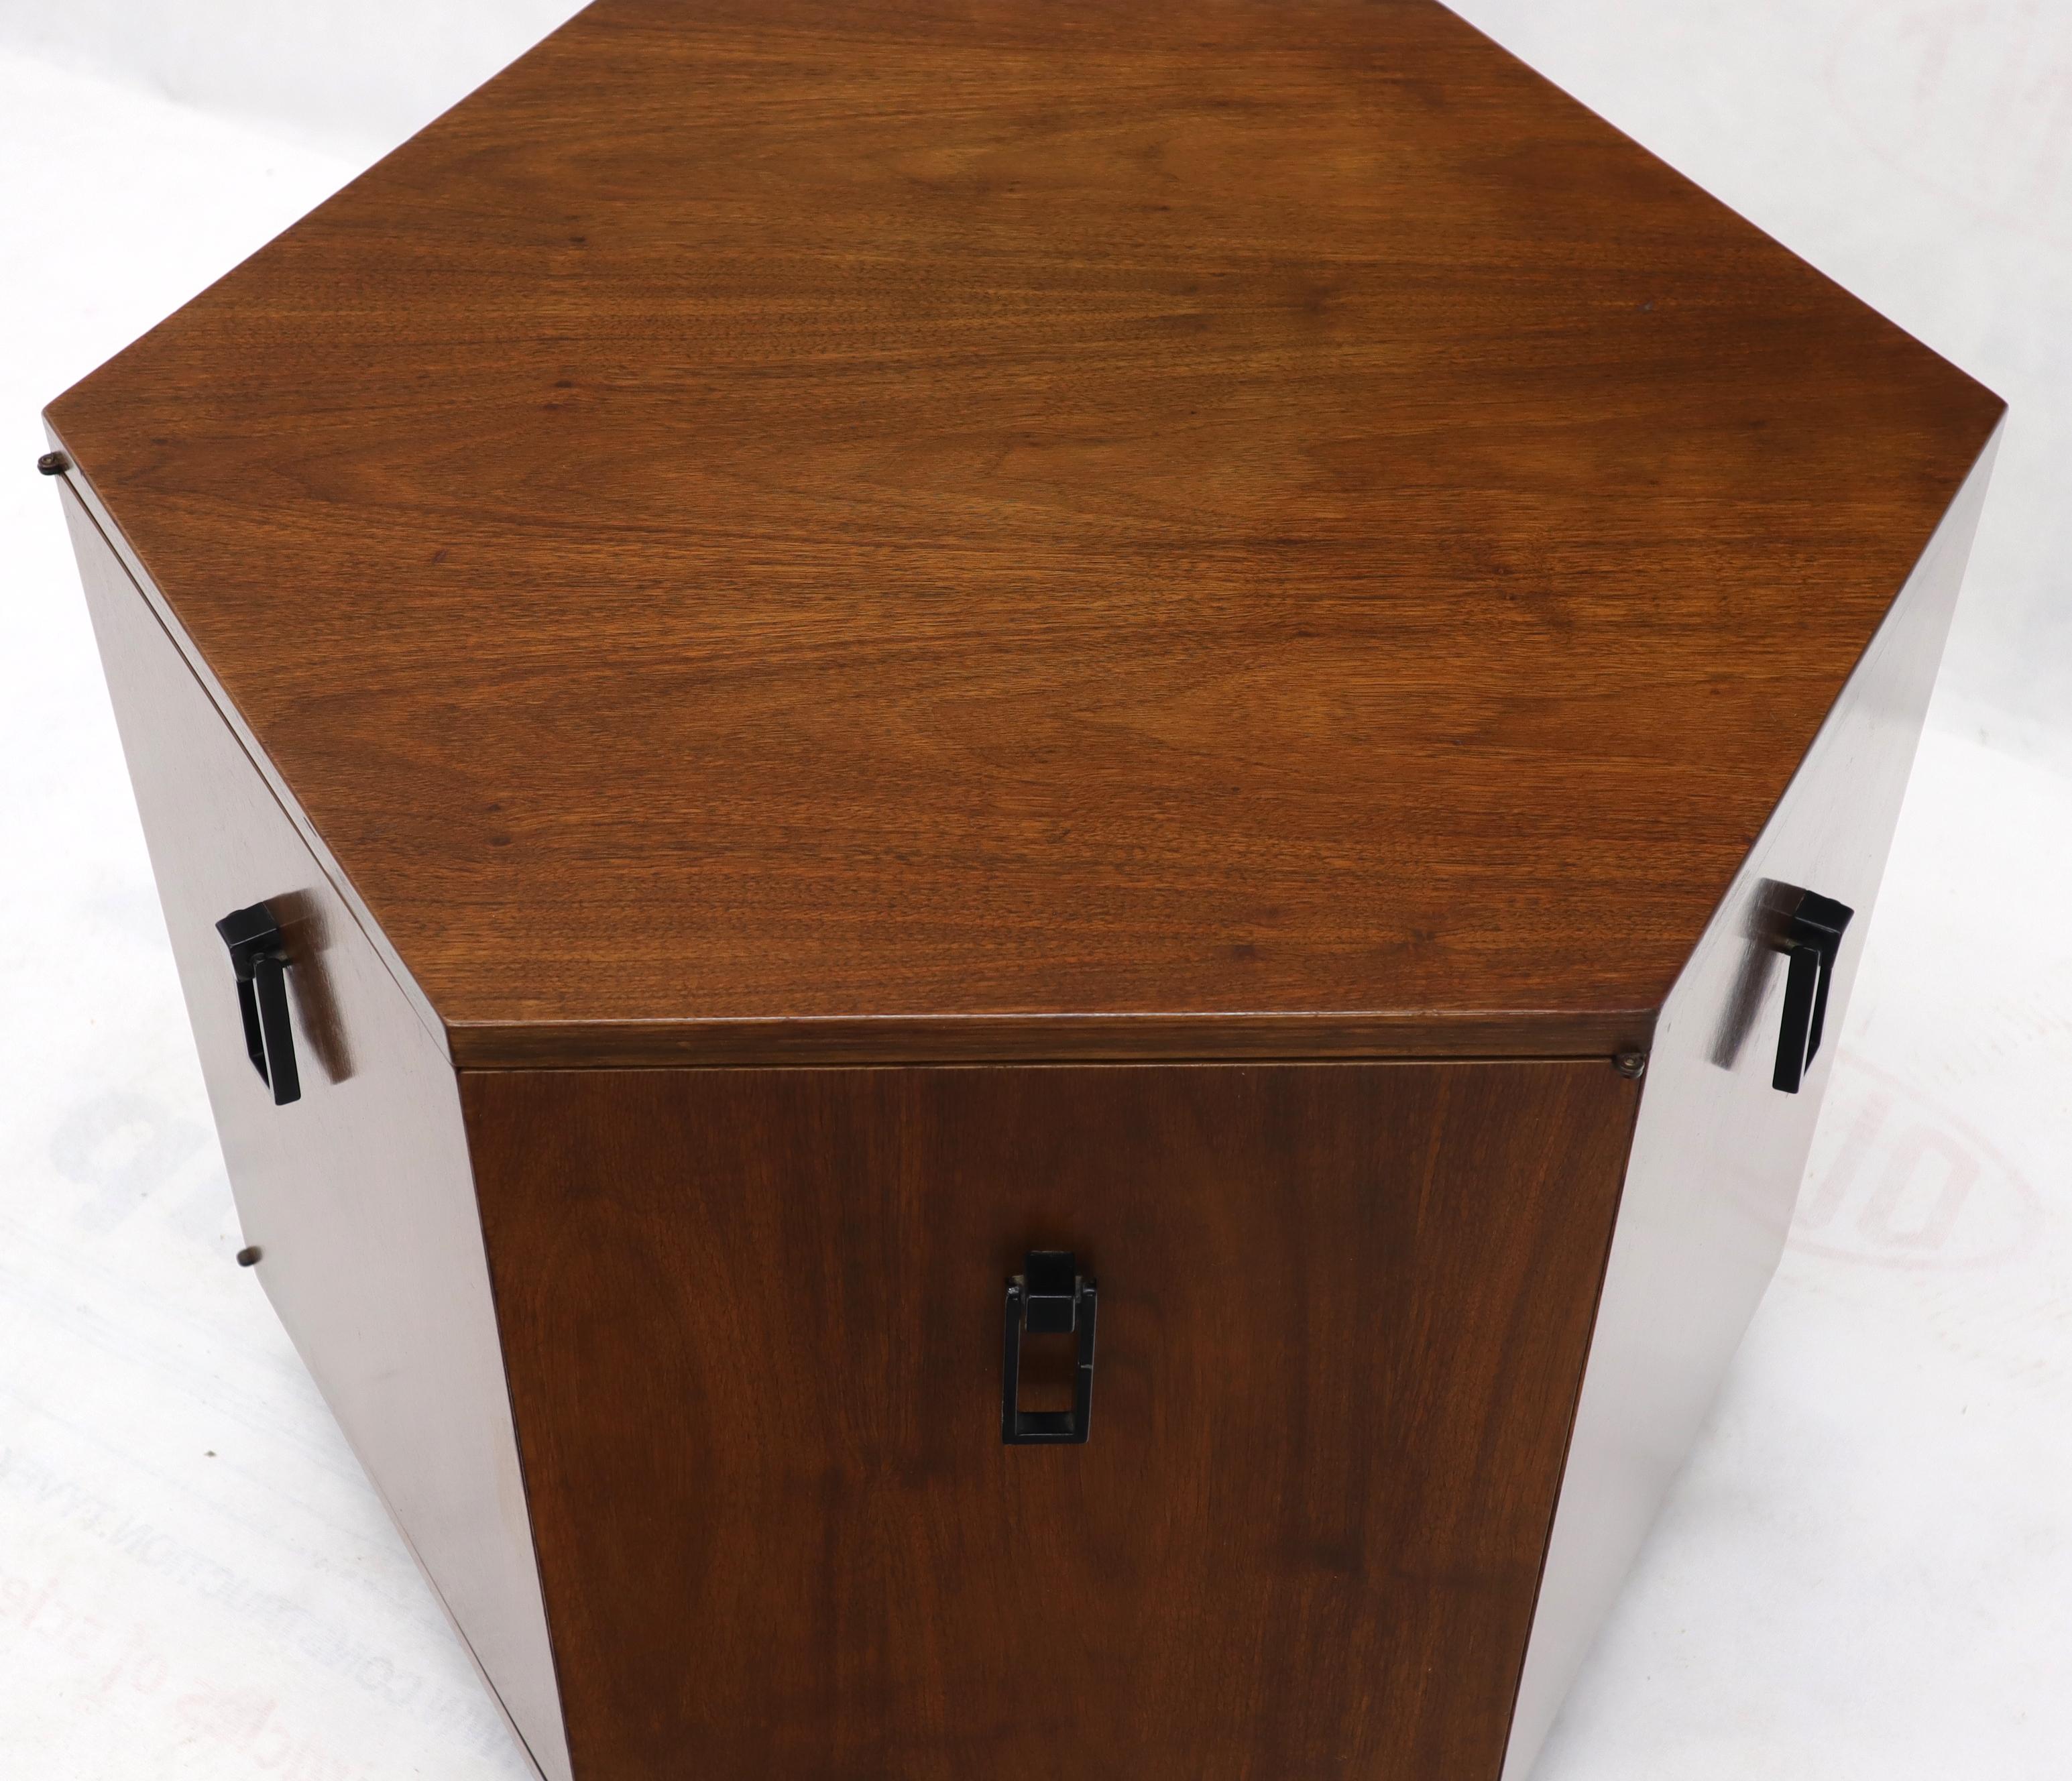 Hexagon Shape Drop Pulls Cabinet End Table In Good Condition For Sale In Rockaway, NJ